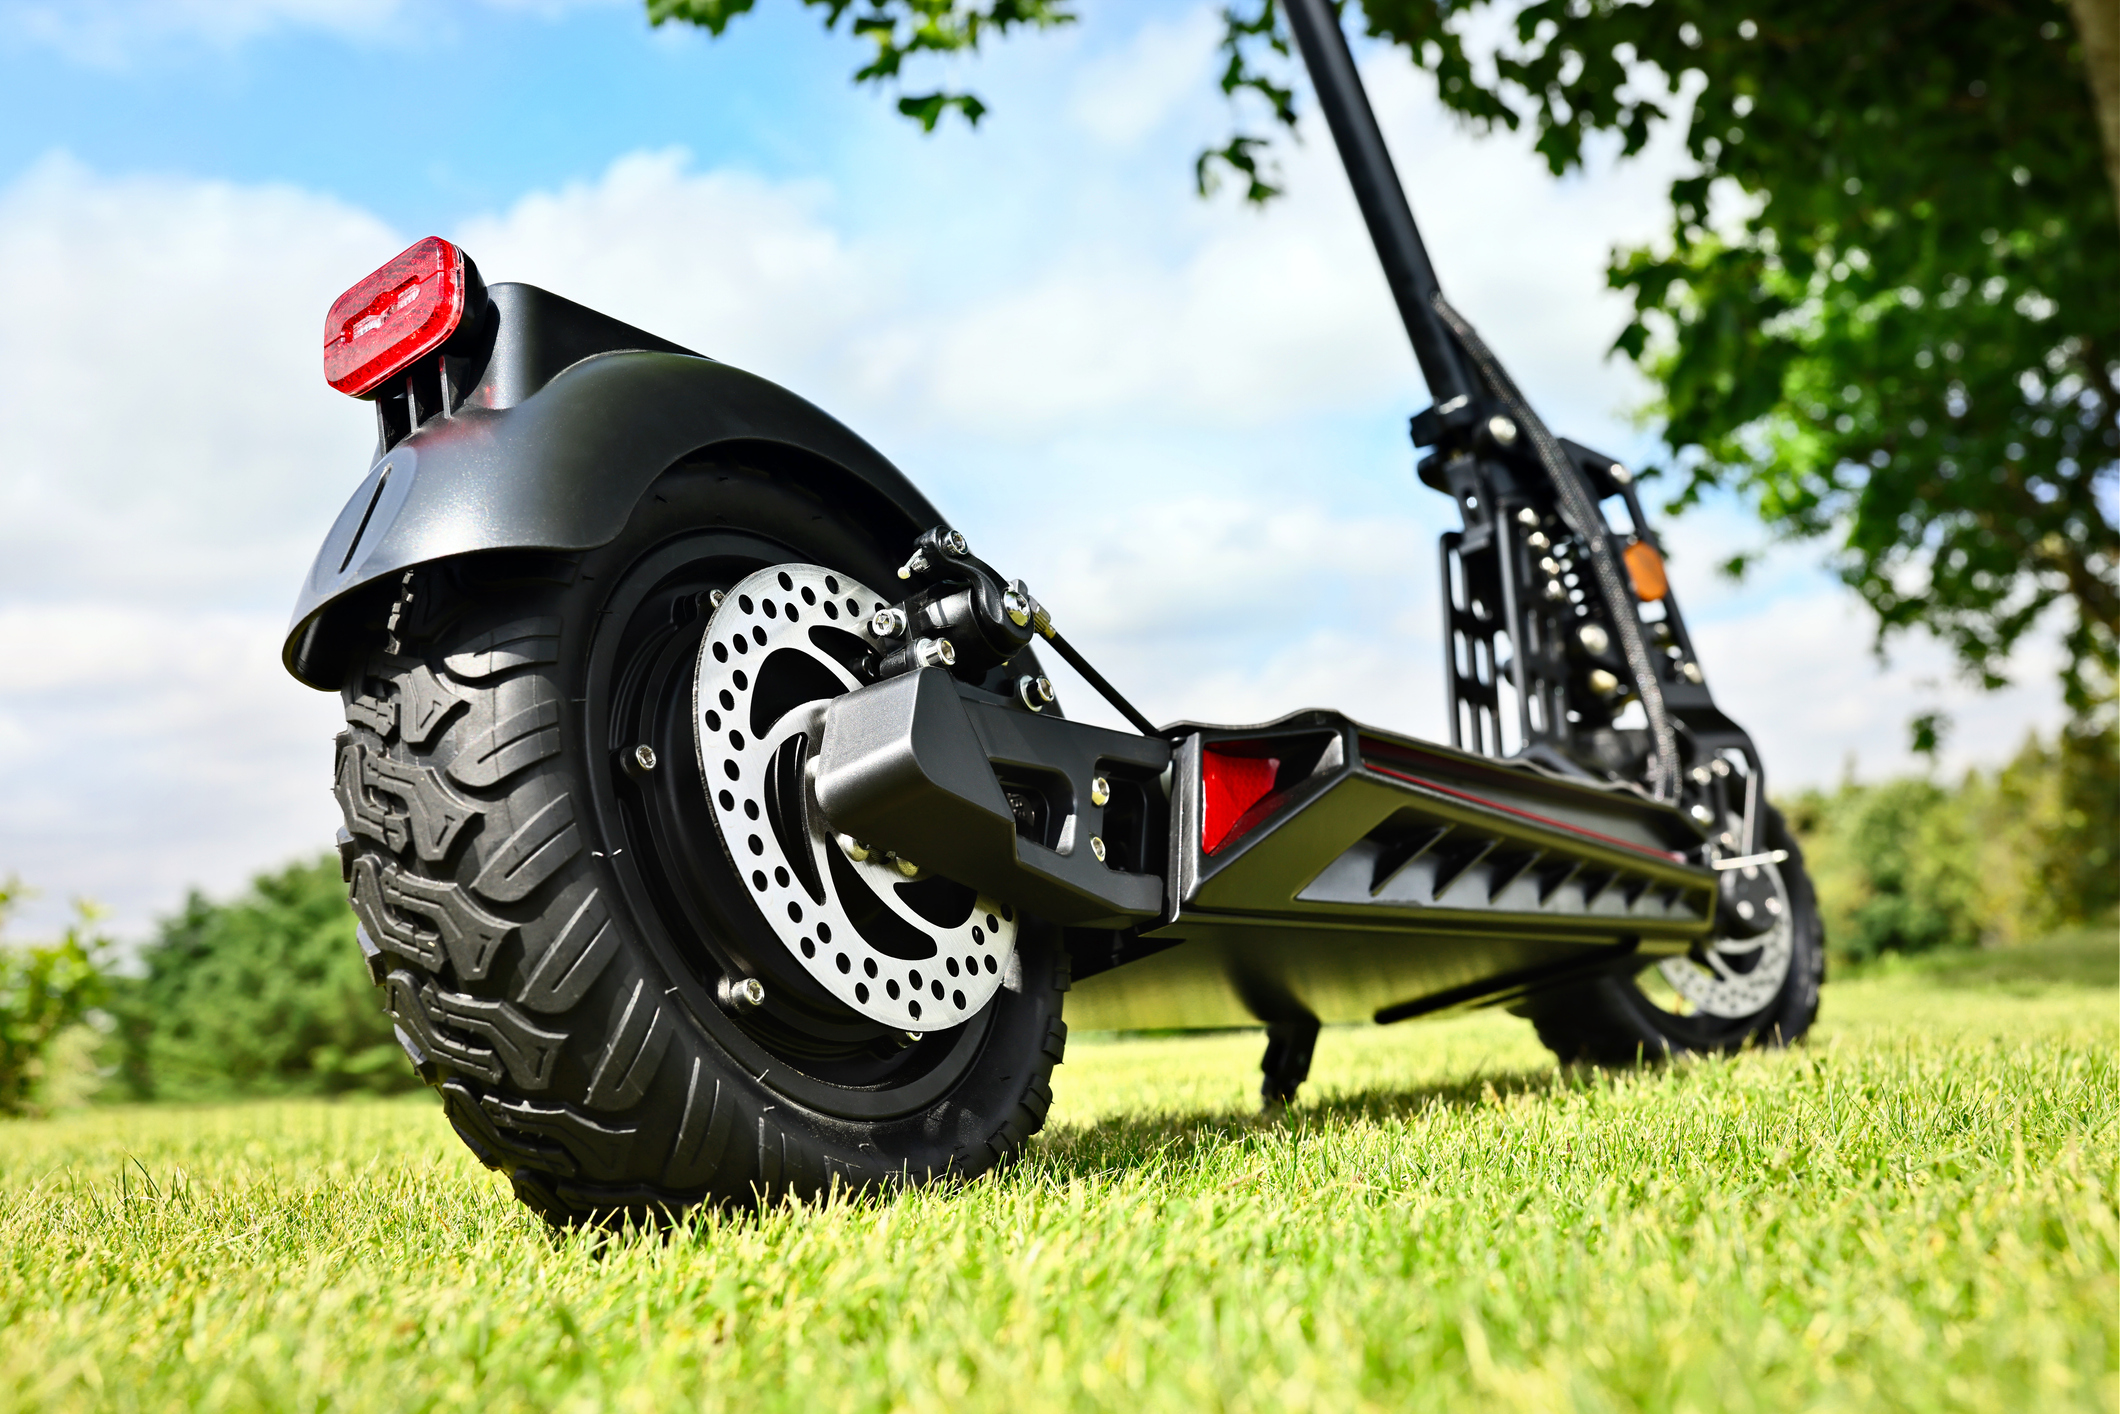 A view from the ground of an electric scooter on grass during a sunny day.